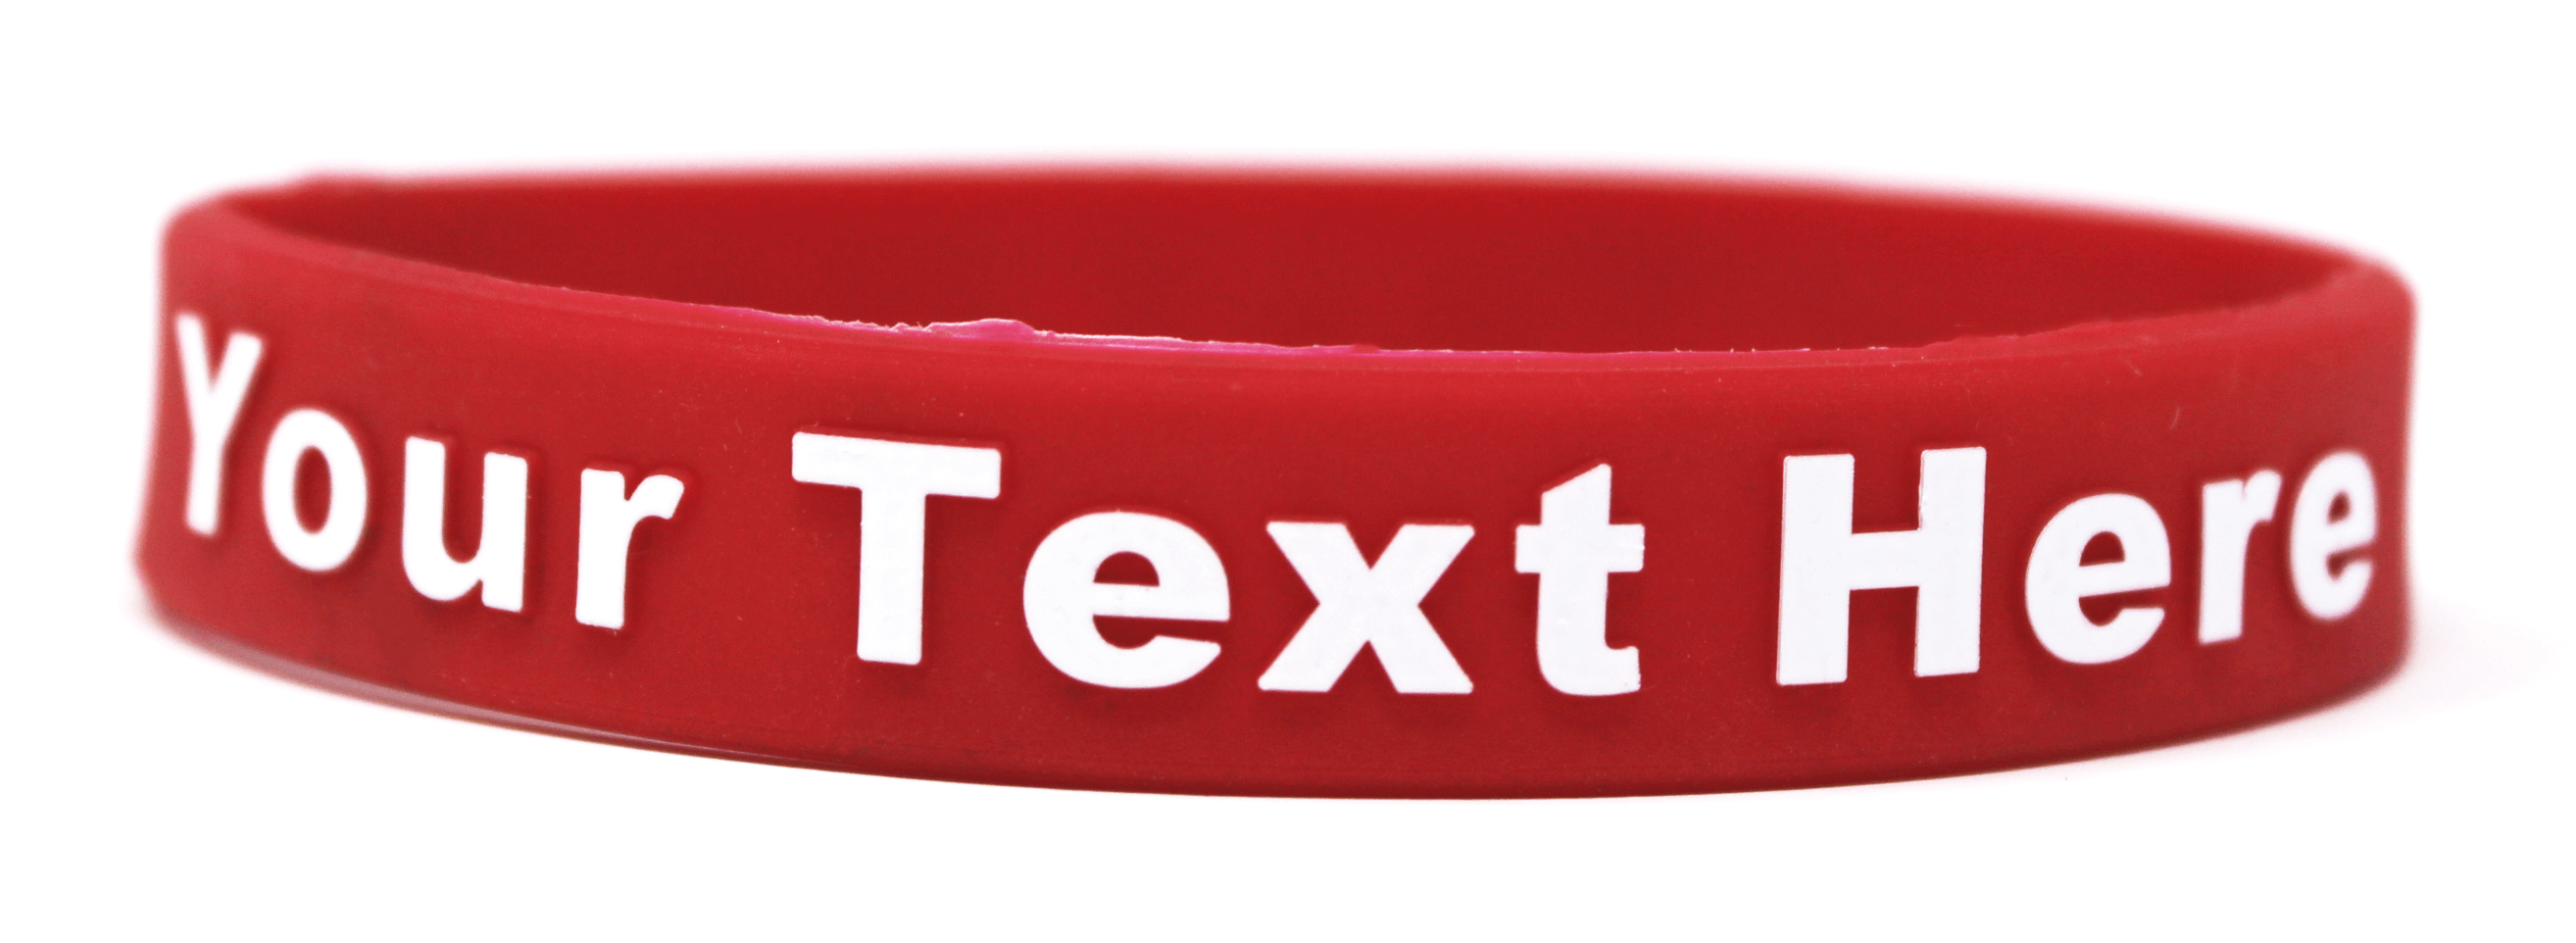 Red wristband represents heart disease, addiction, and much more